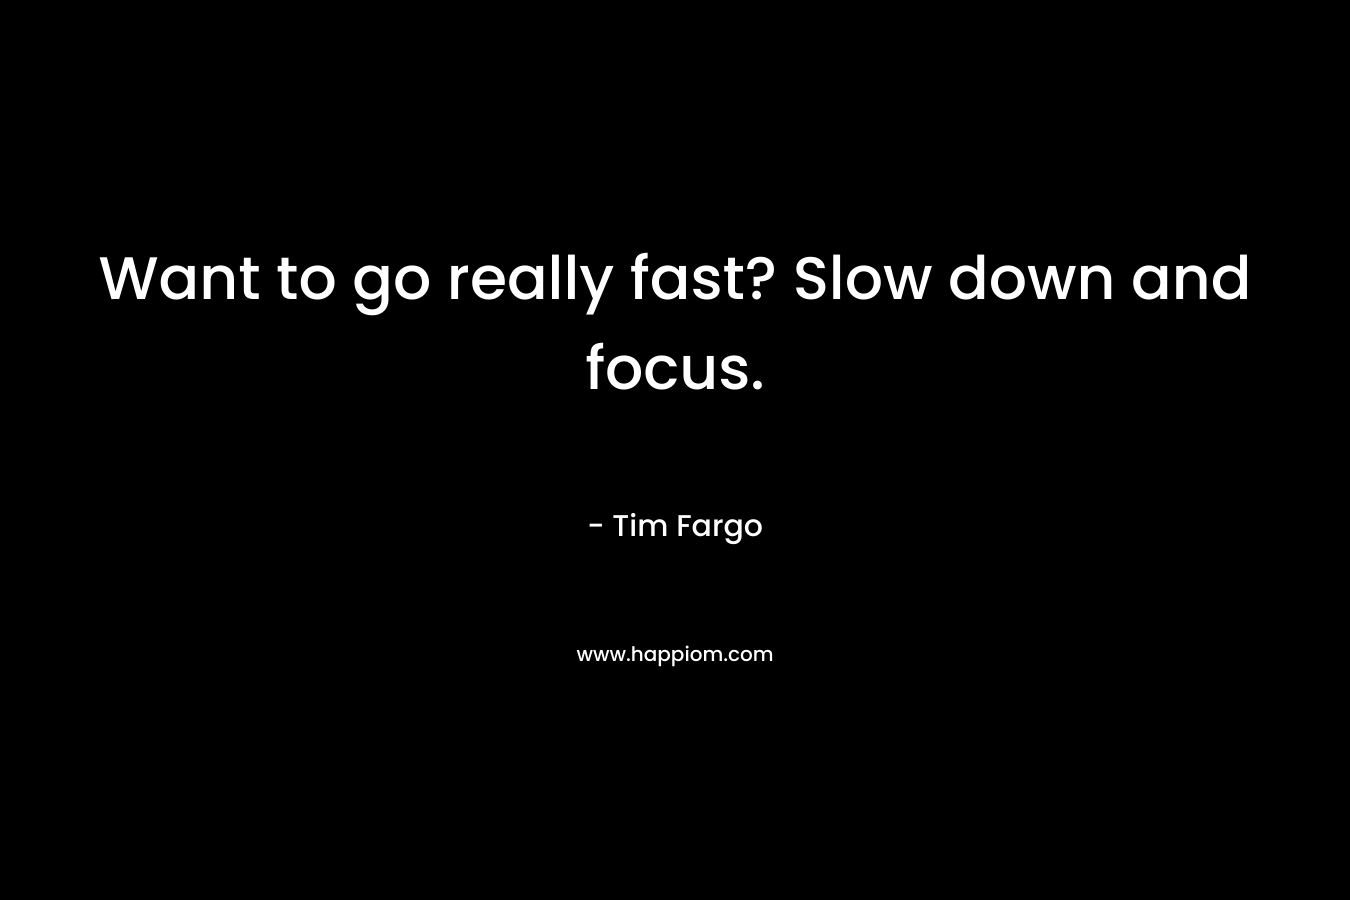 Want to go really fast? Slow down and focus. – Tim Fargo